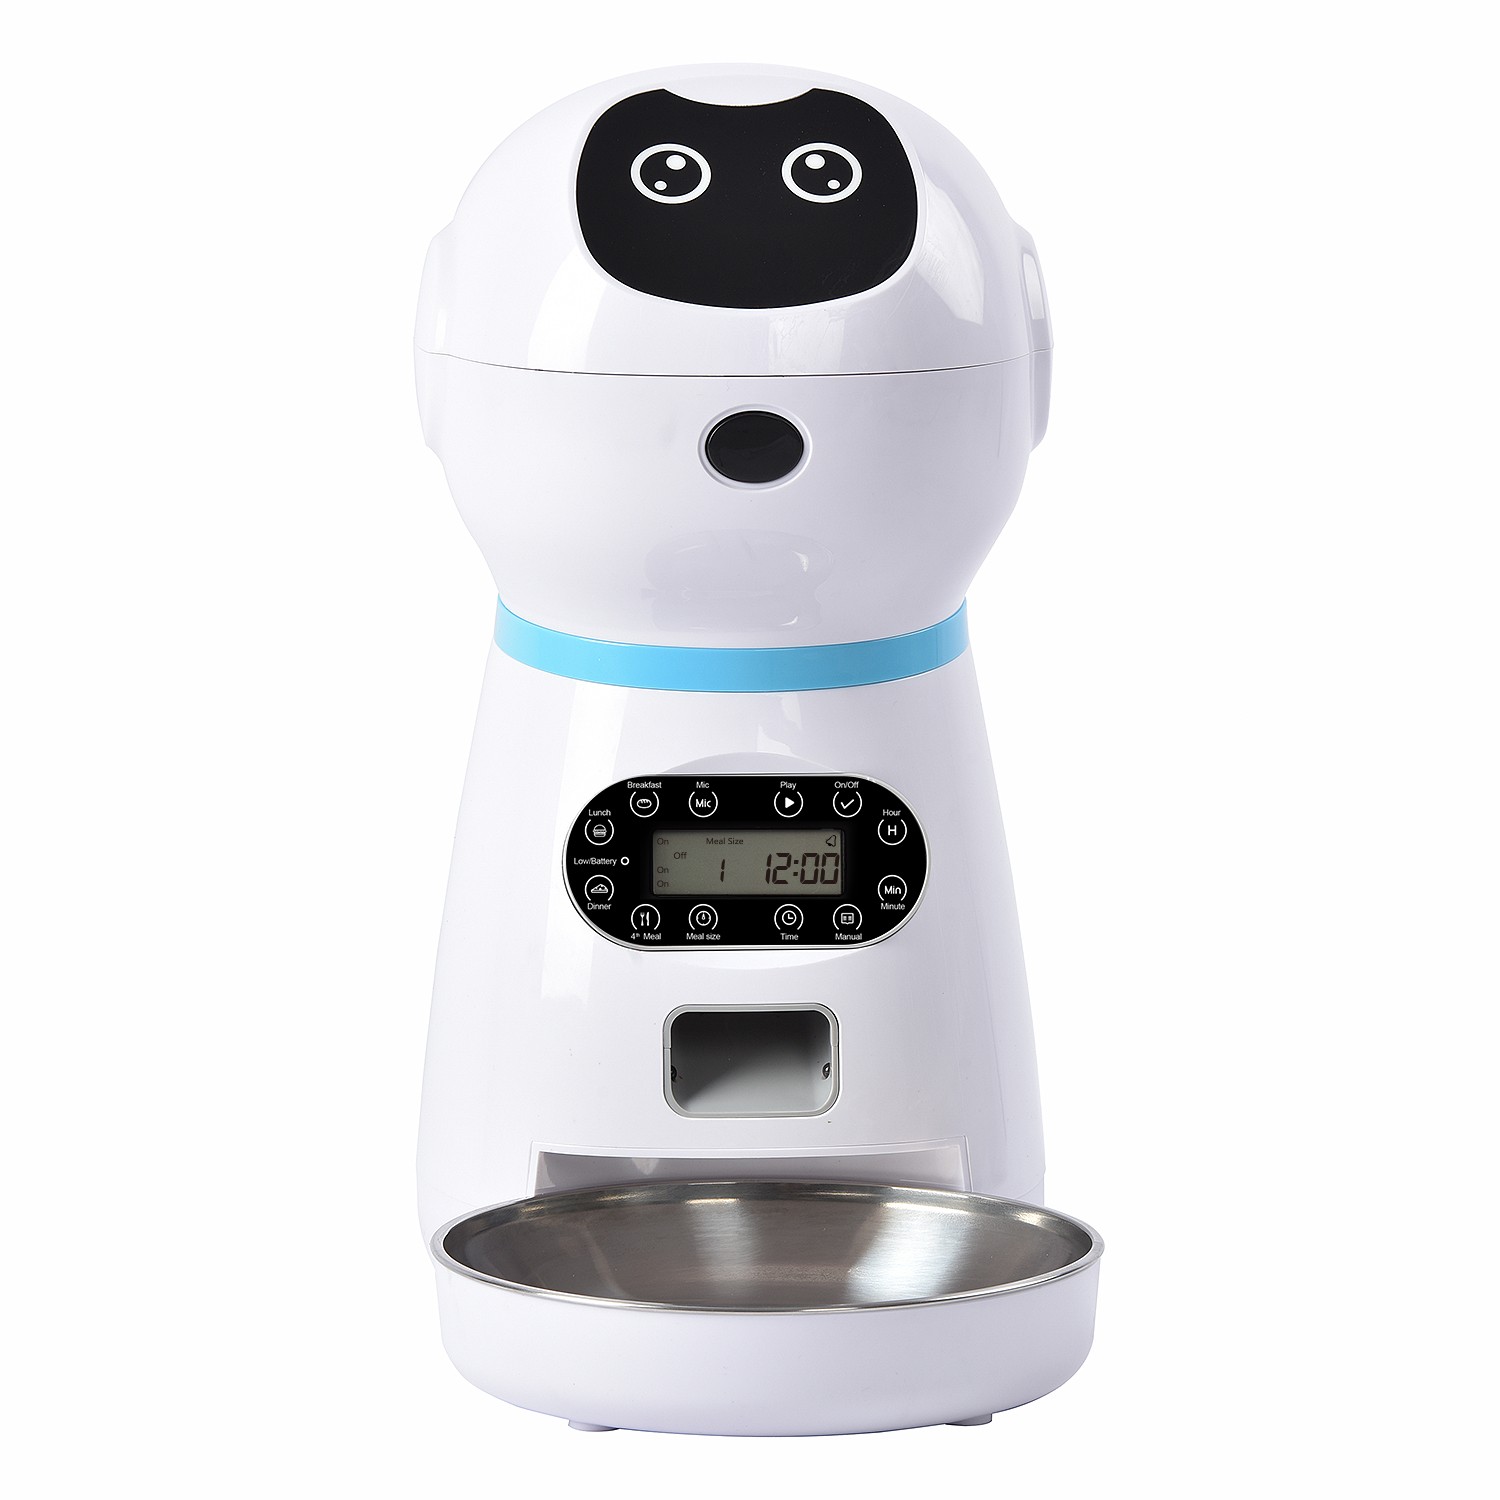 Durable auto timed pet feeder electronic USB charge 3L capacity automatic pet feeder robot lovely dog cat smart feeding bowl